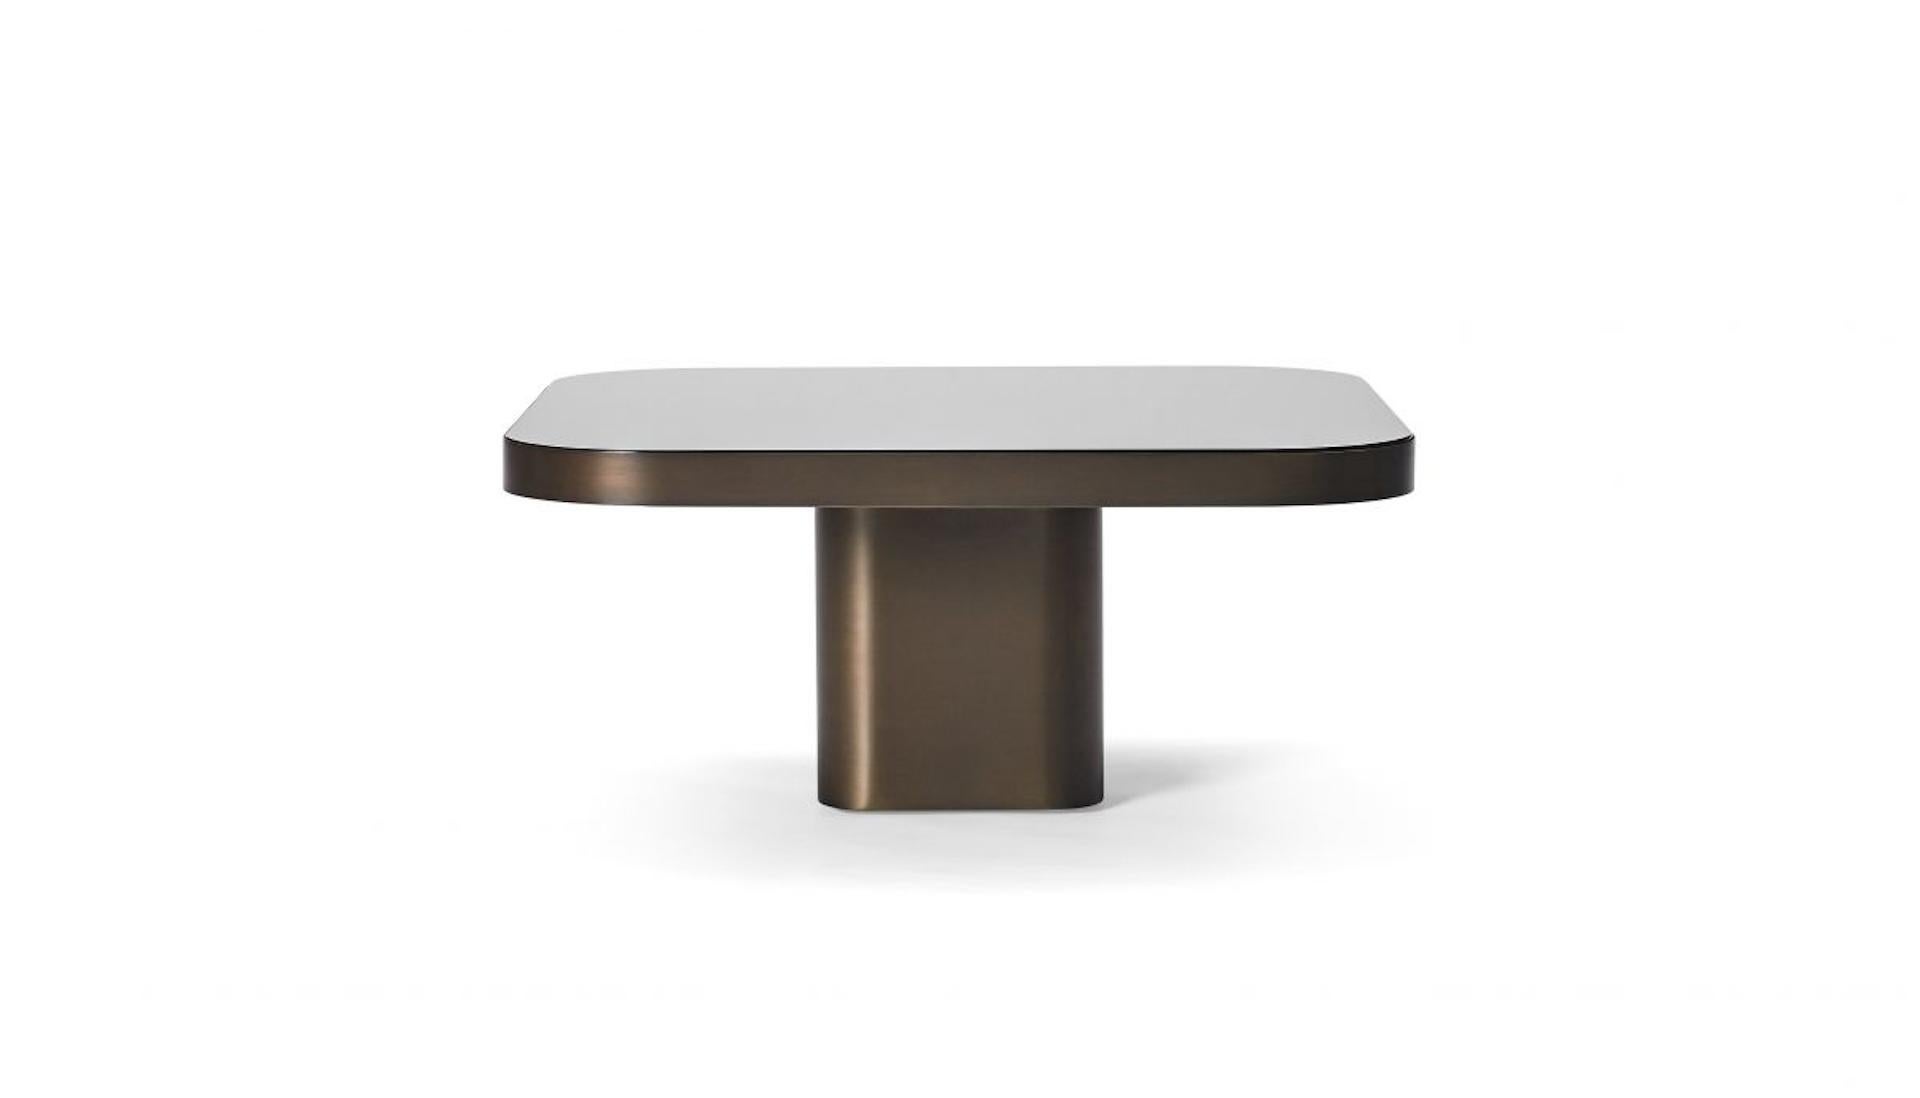 Set of table - 
Bow 3 & 5
dimensions of bow 3: 70x70x31cm
Bow 5: 100x100x 25cm

Inspired by 1970s lines and designs, Brazilian Guilherme Torres presents a side table or coffee table of casual elegance. The metal-covered surface of the body also